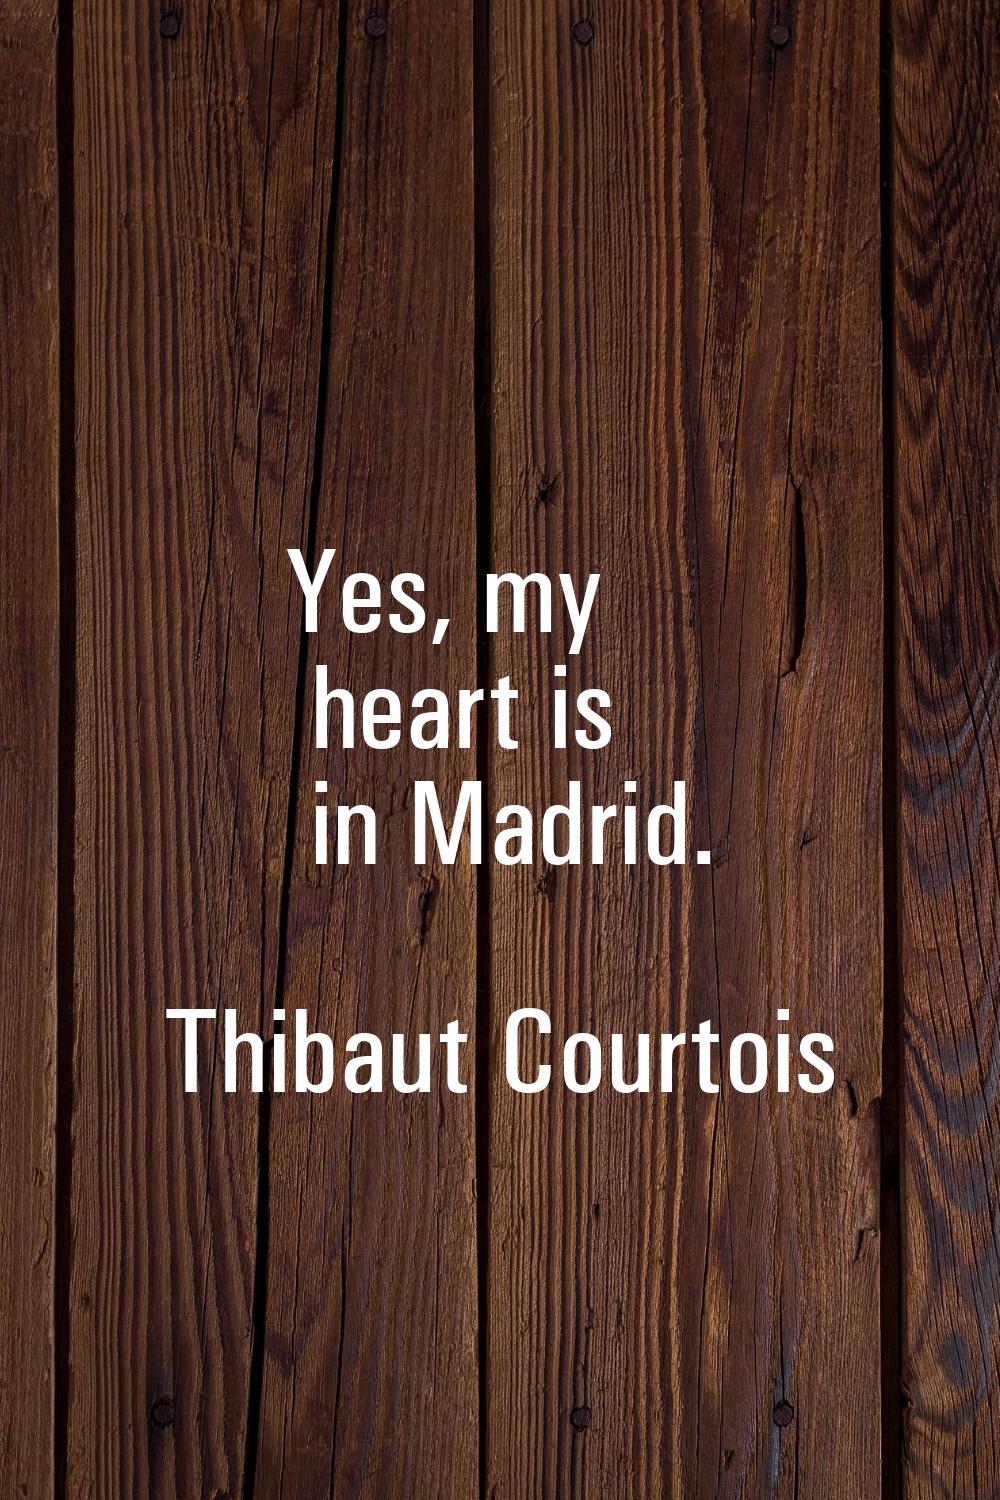 Yes, my heart is in Madrid.